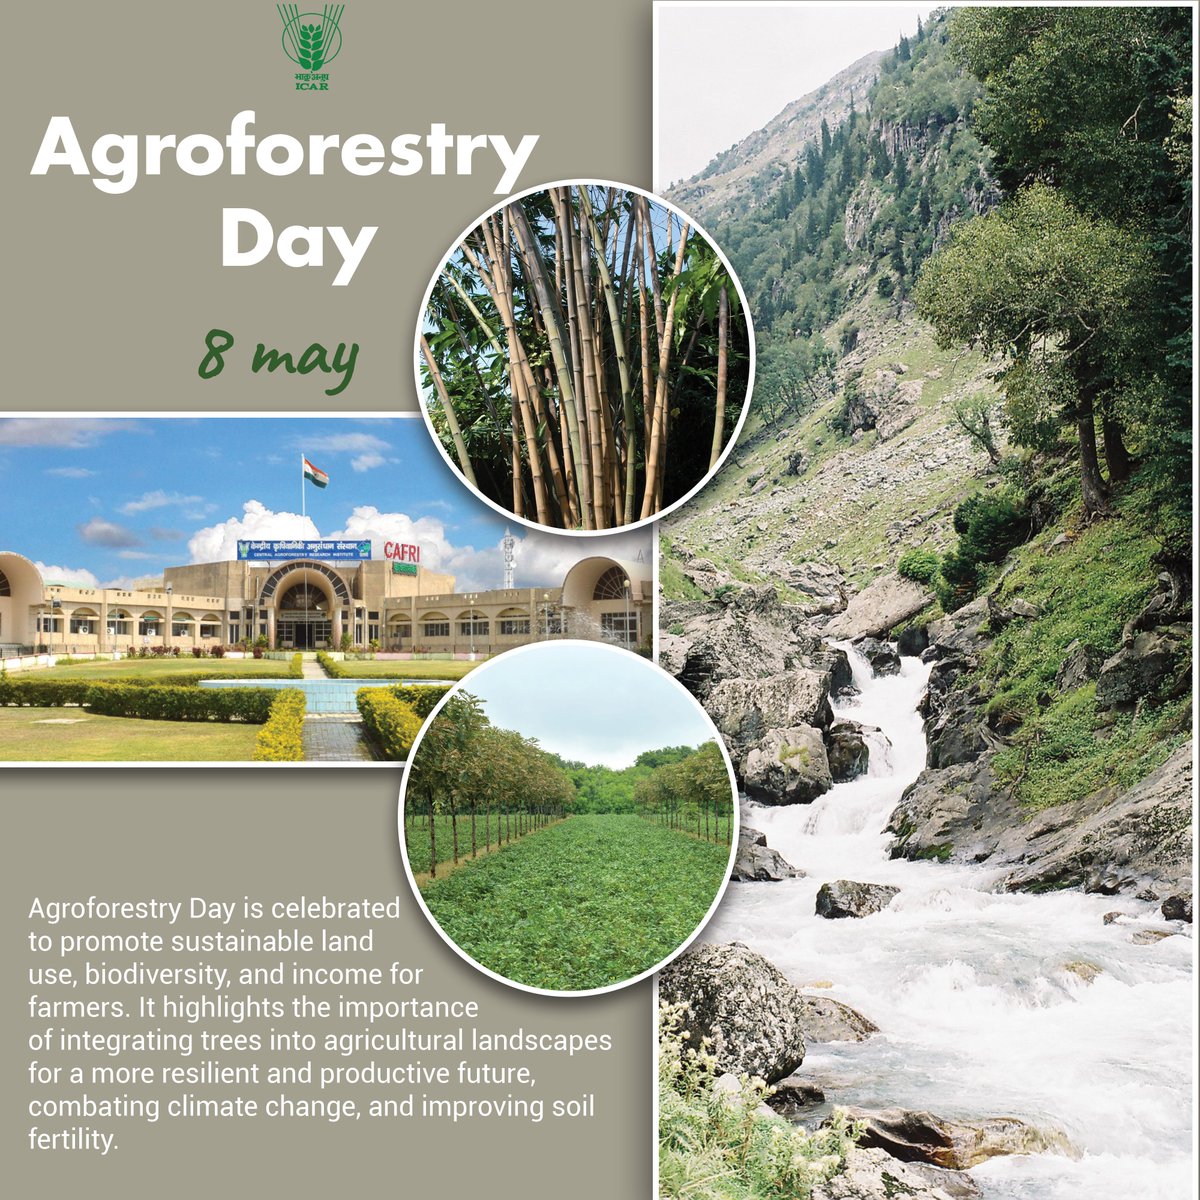 Agroforestry Day 8th May 

#ICAR #Agriculture #farming @PMOIndia
@mygovindia  @PIB_India  @AgriGoI
 @DDKisanChannel @Dept_of_AHD
 #AgroforestryDay